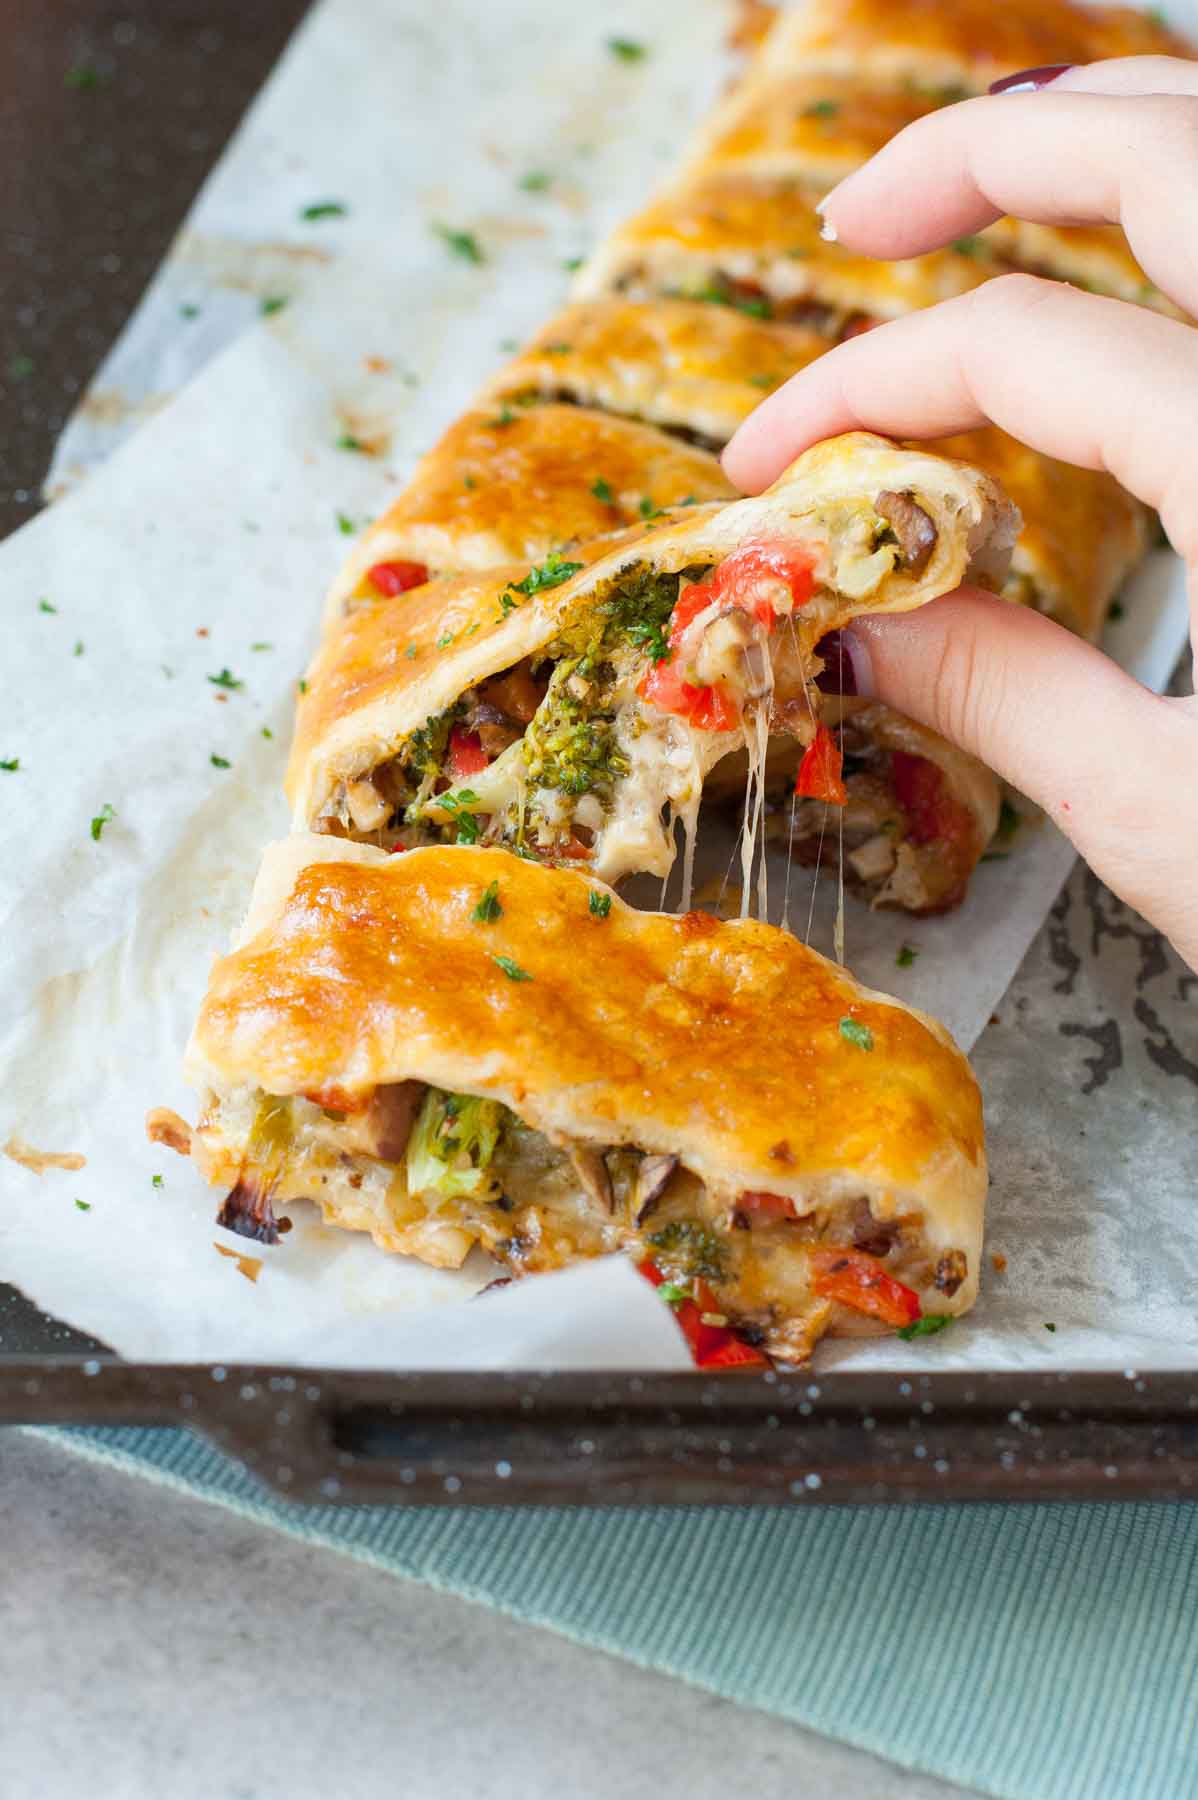 Puff pastry strudel with vegetables and cheese on a piece of baking paper.